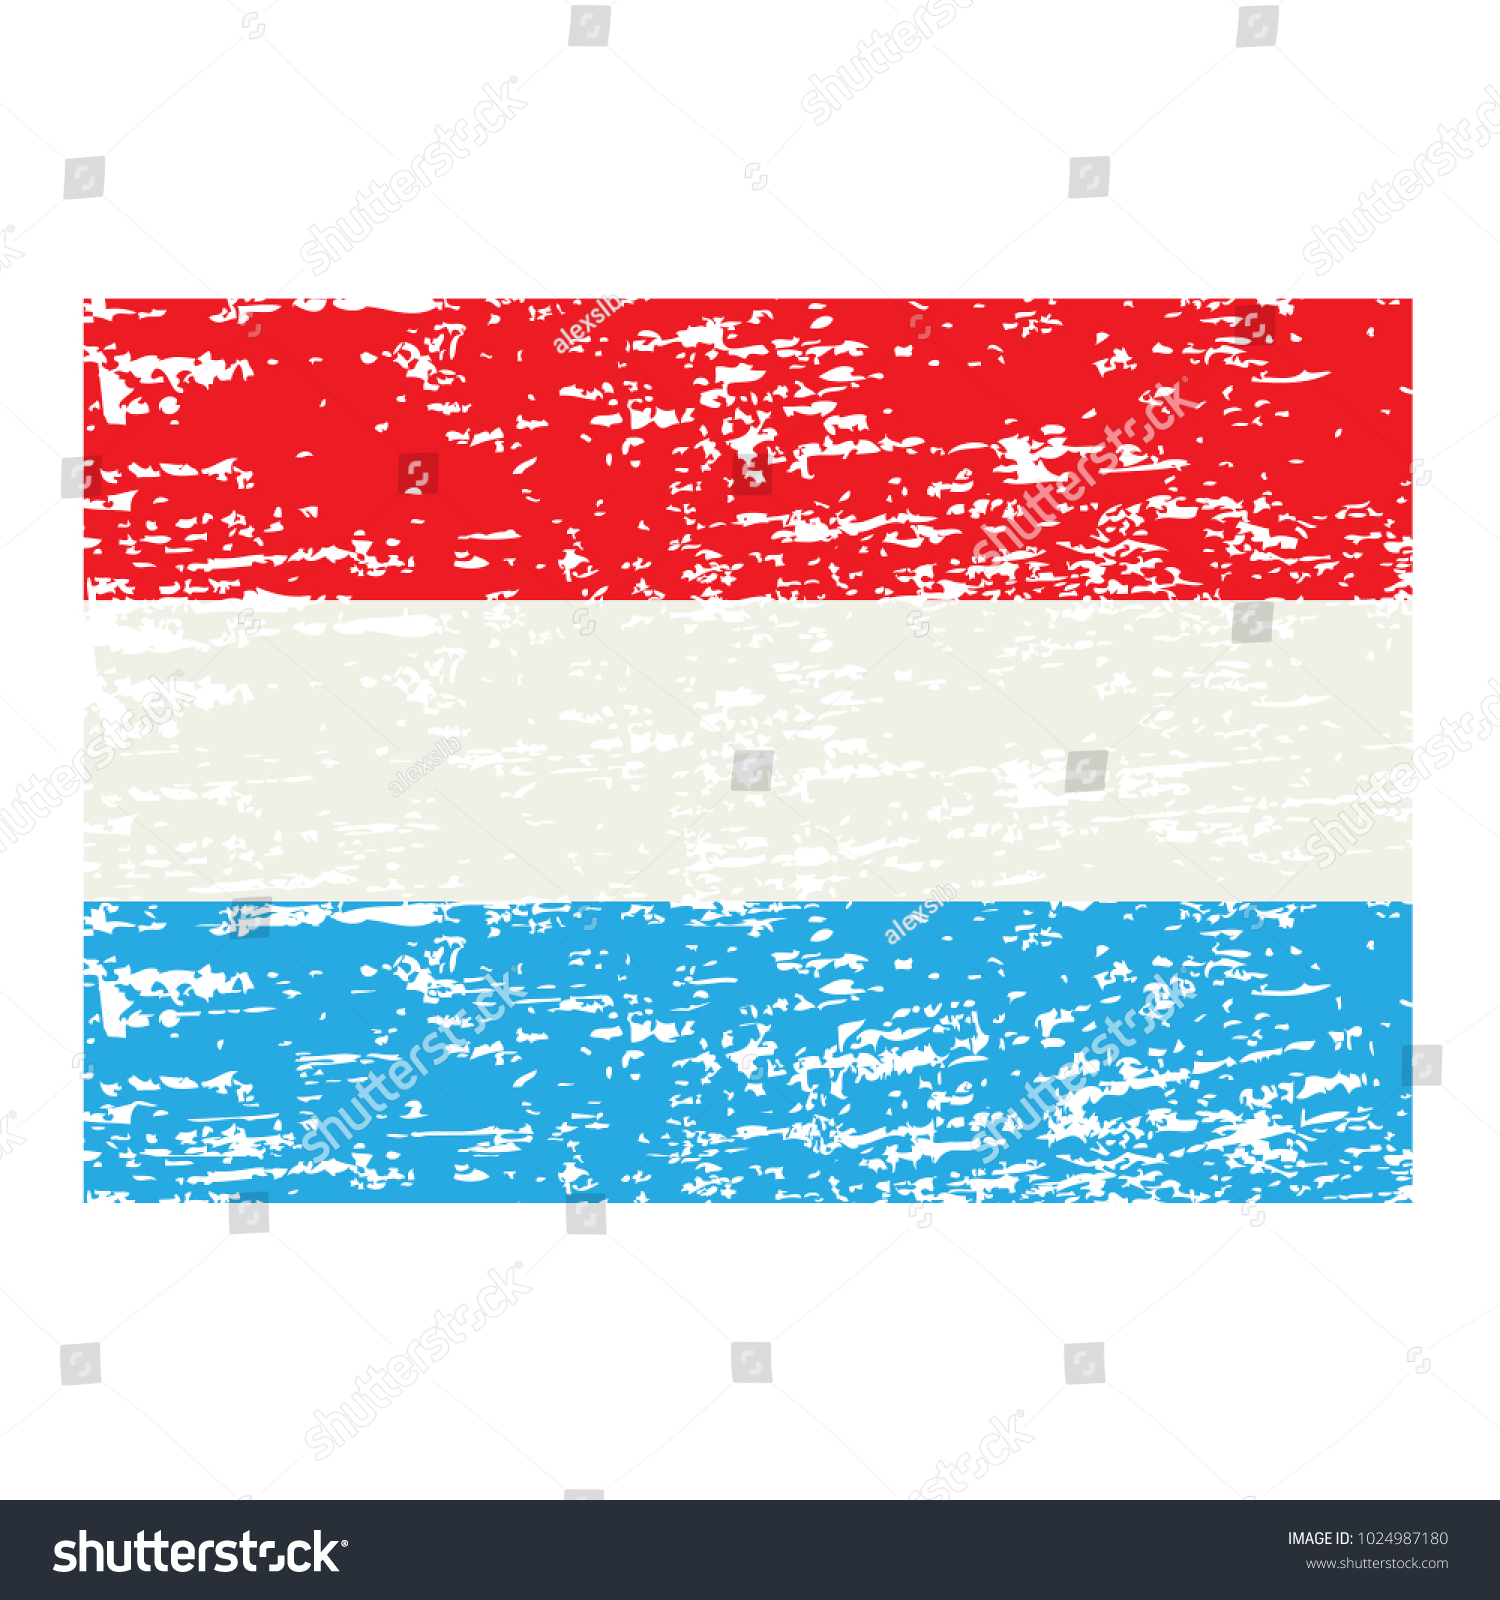 Grunge Flag Luxembourg Luxembourg Flag Grunge Stock Vector ...